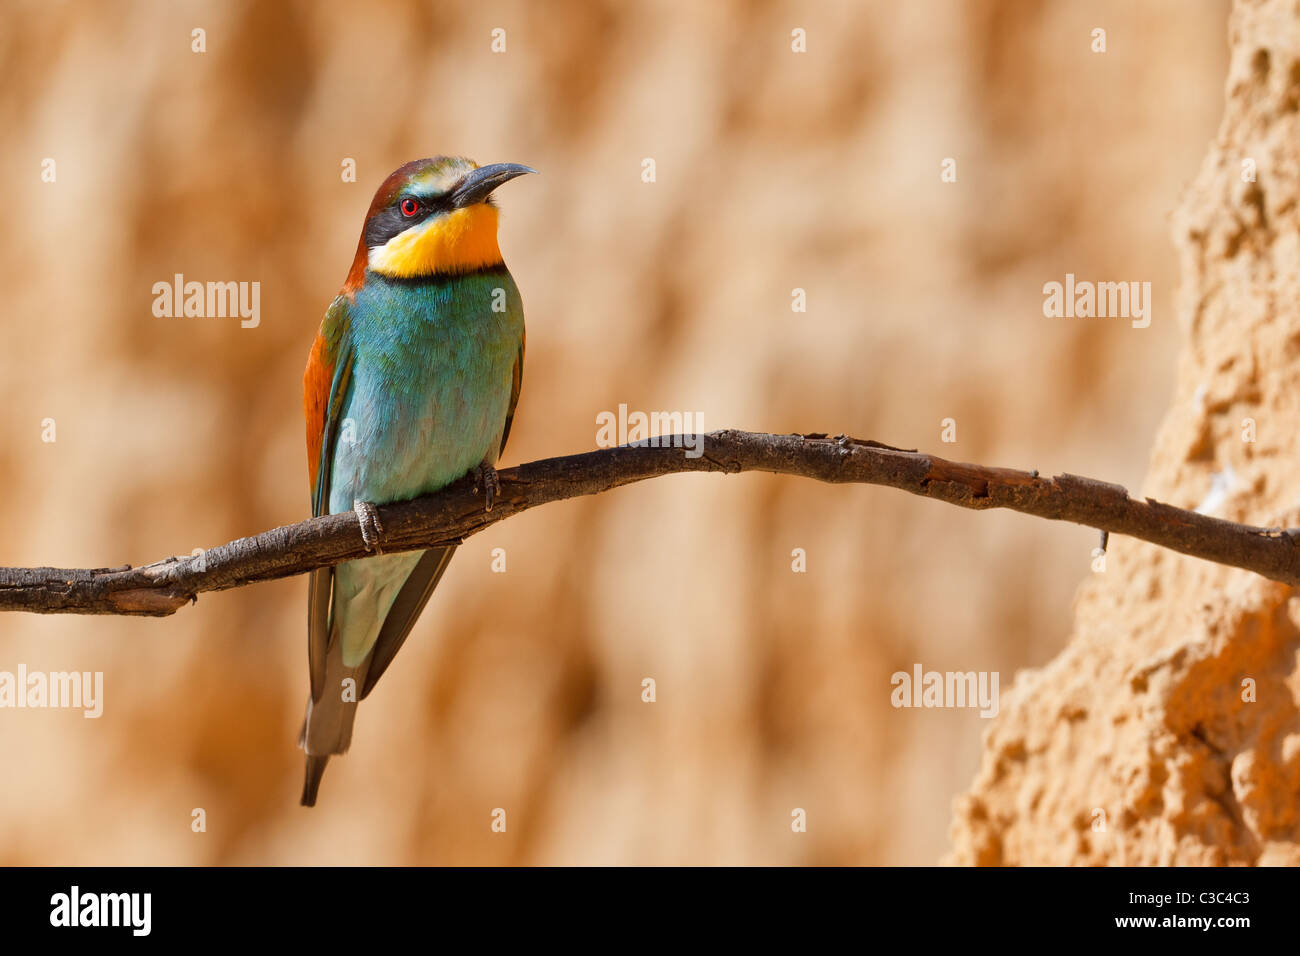 European bee-eater, Merops apiaster. Shallow depth of field and bakground blurred Stock Photo